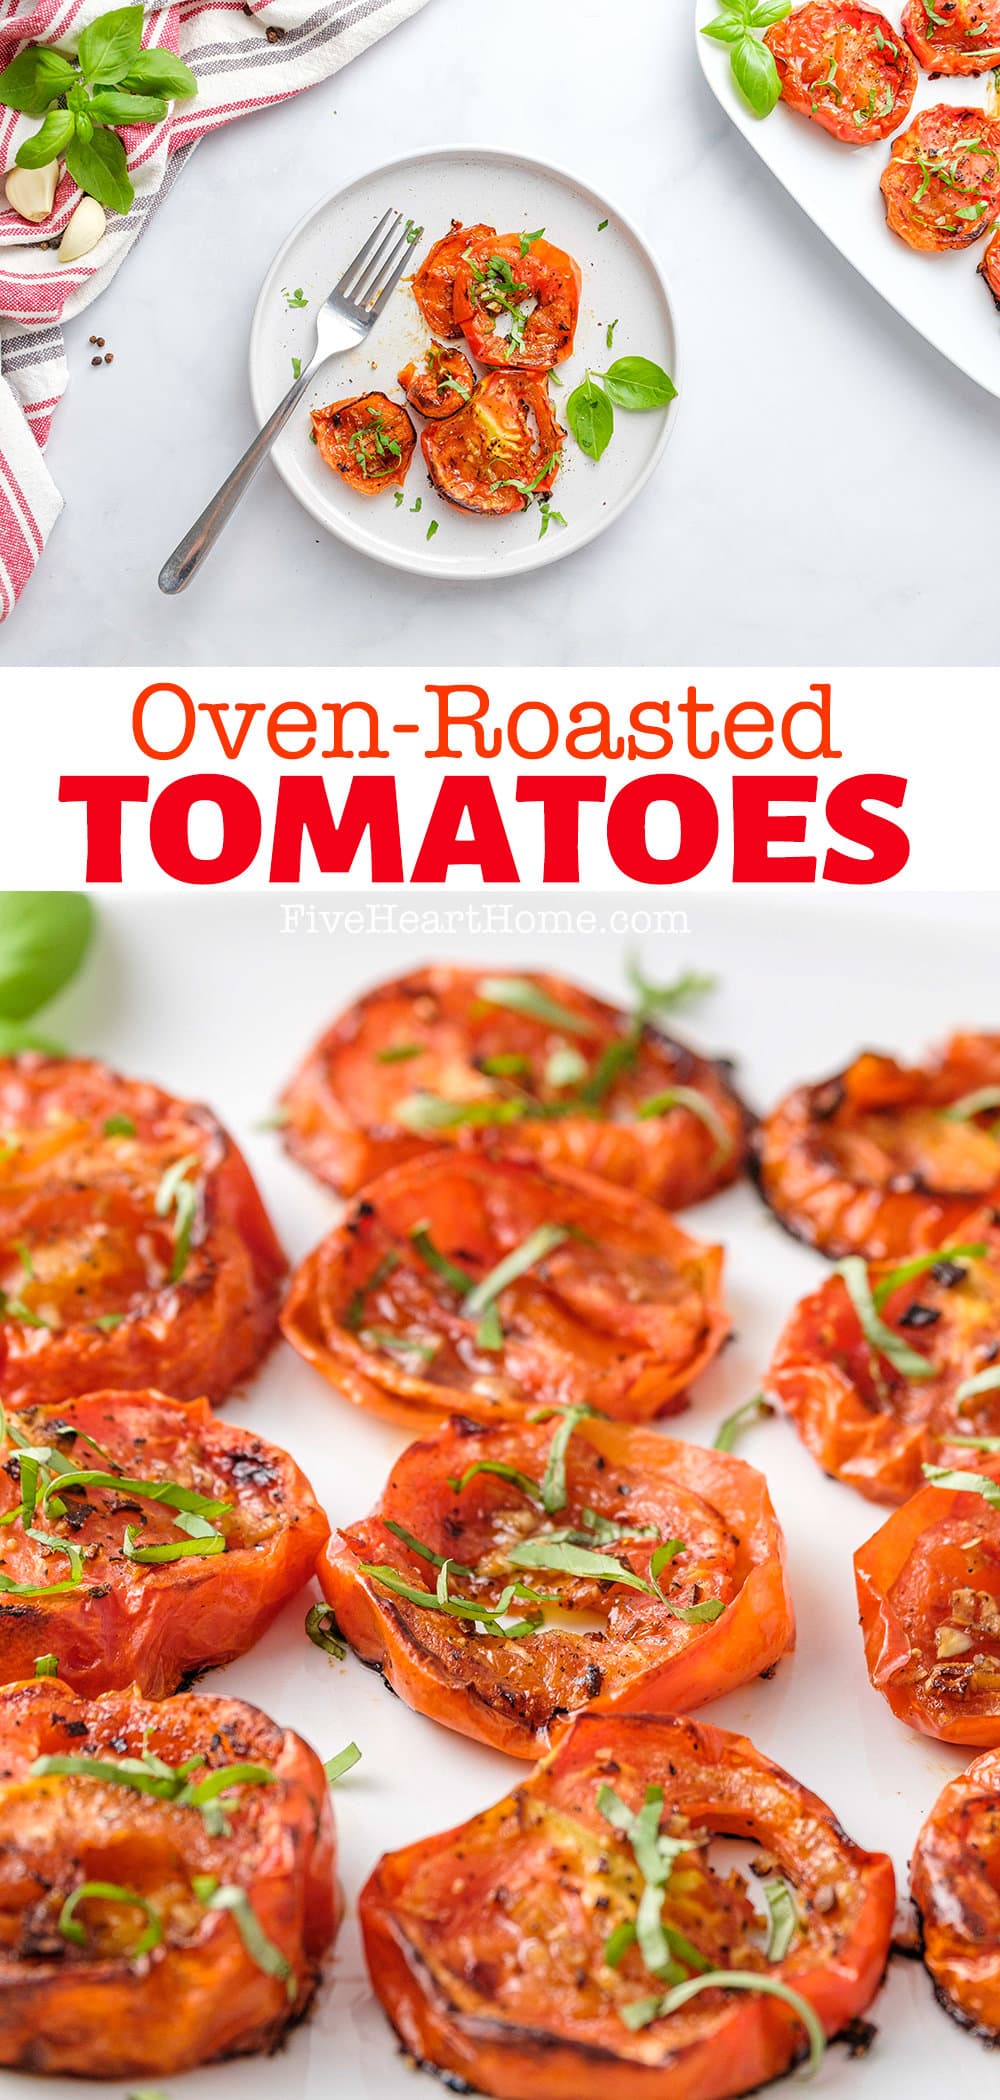 Roasted Tomatoes ~ a delicious side dish featuring ripe tomatoes drizzled with olive oil and balsamic vinegar, seasoned with garlic, salt, and pepper, and oven roasted to sweet and savory, caramelized perfection! | FiveHeartHome.com via @fivehearthome